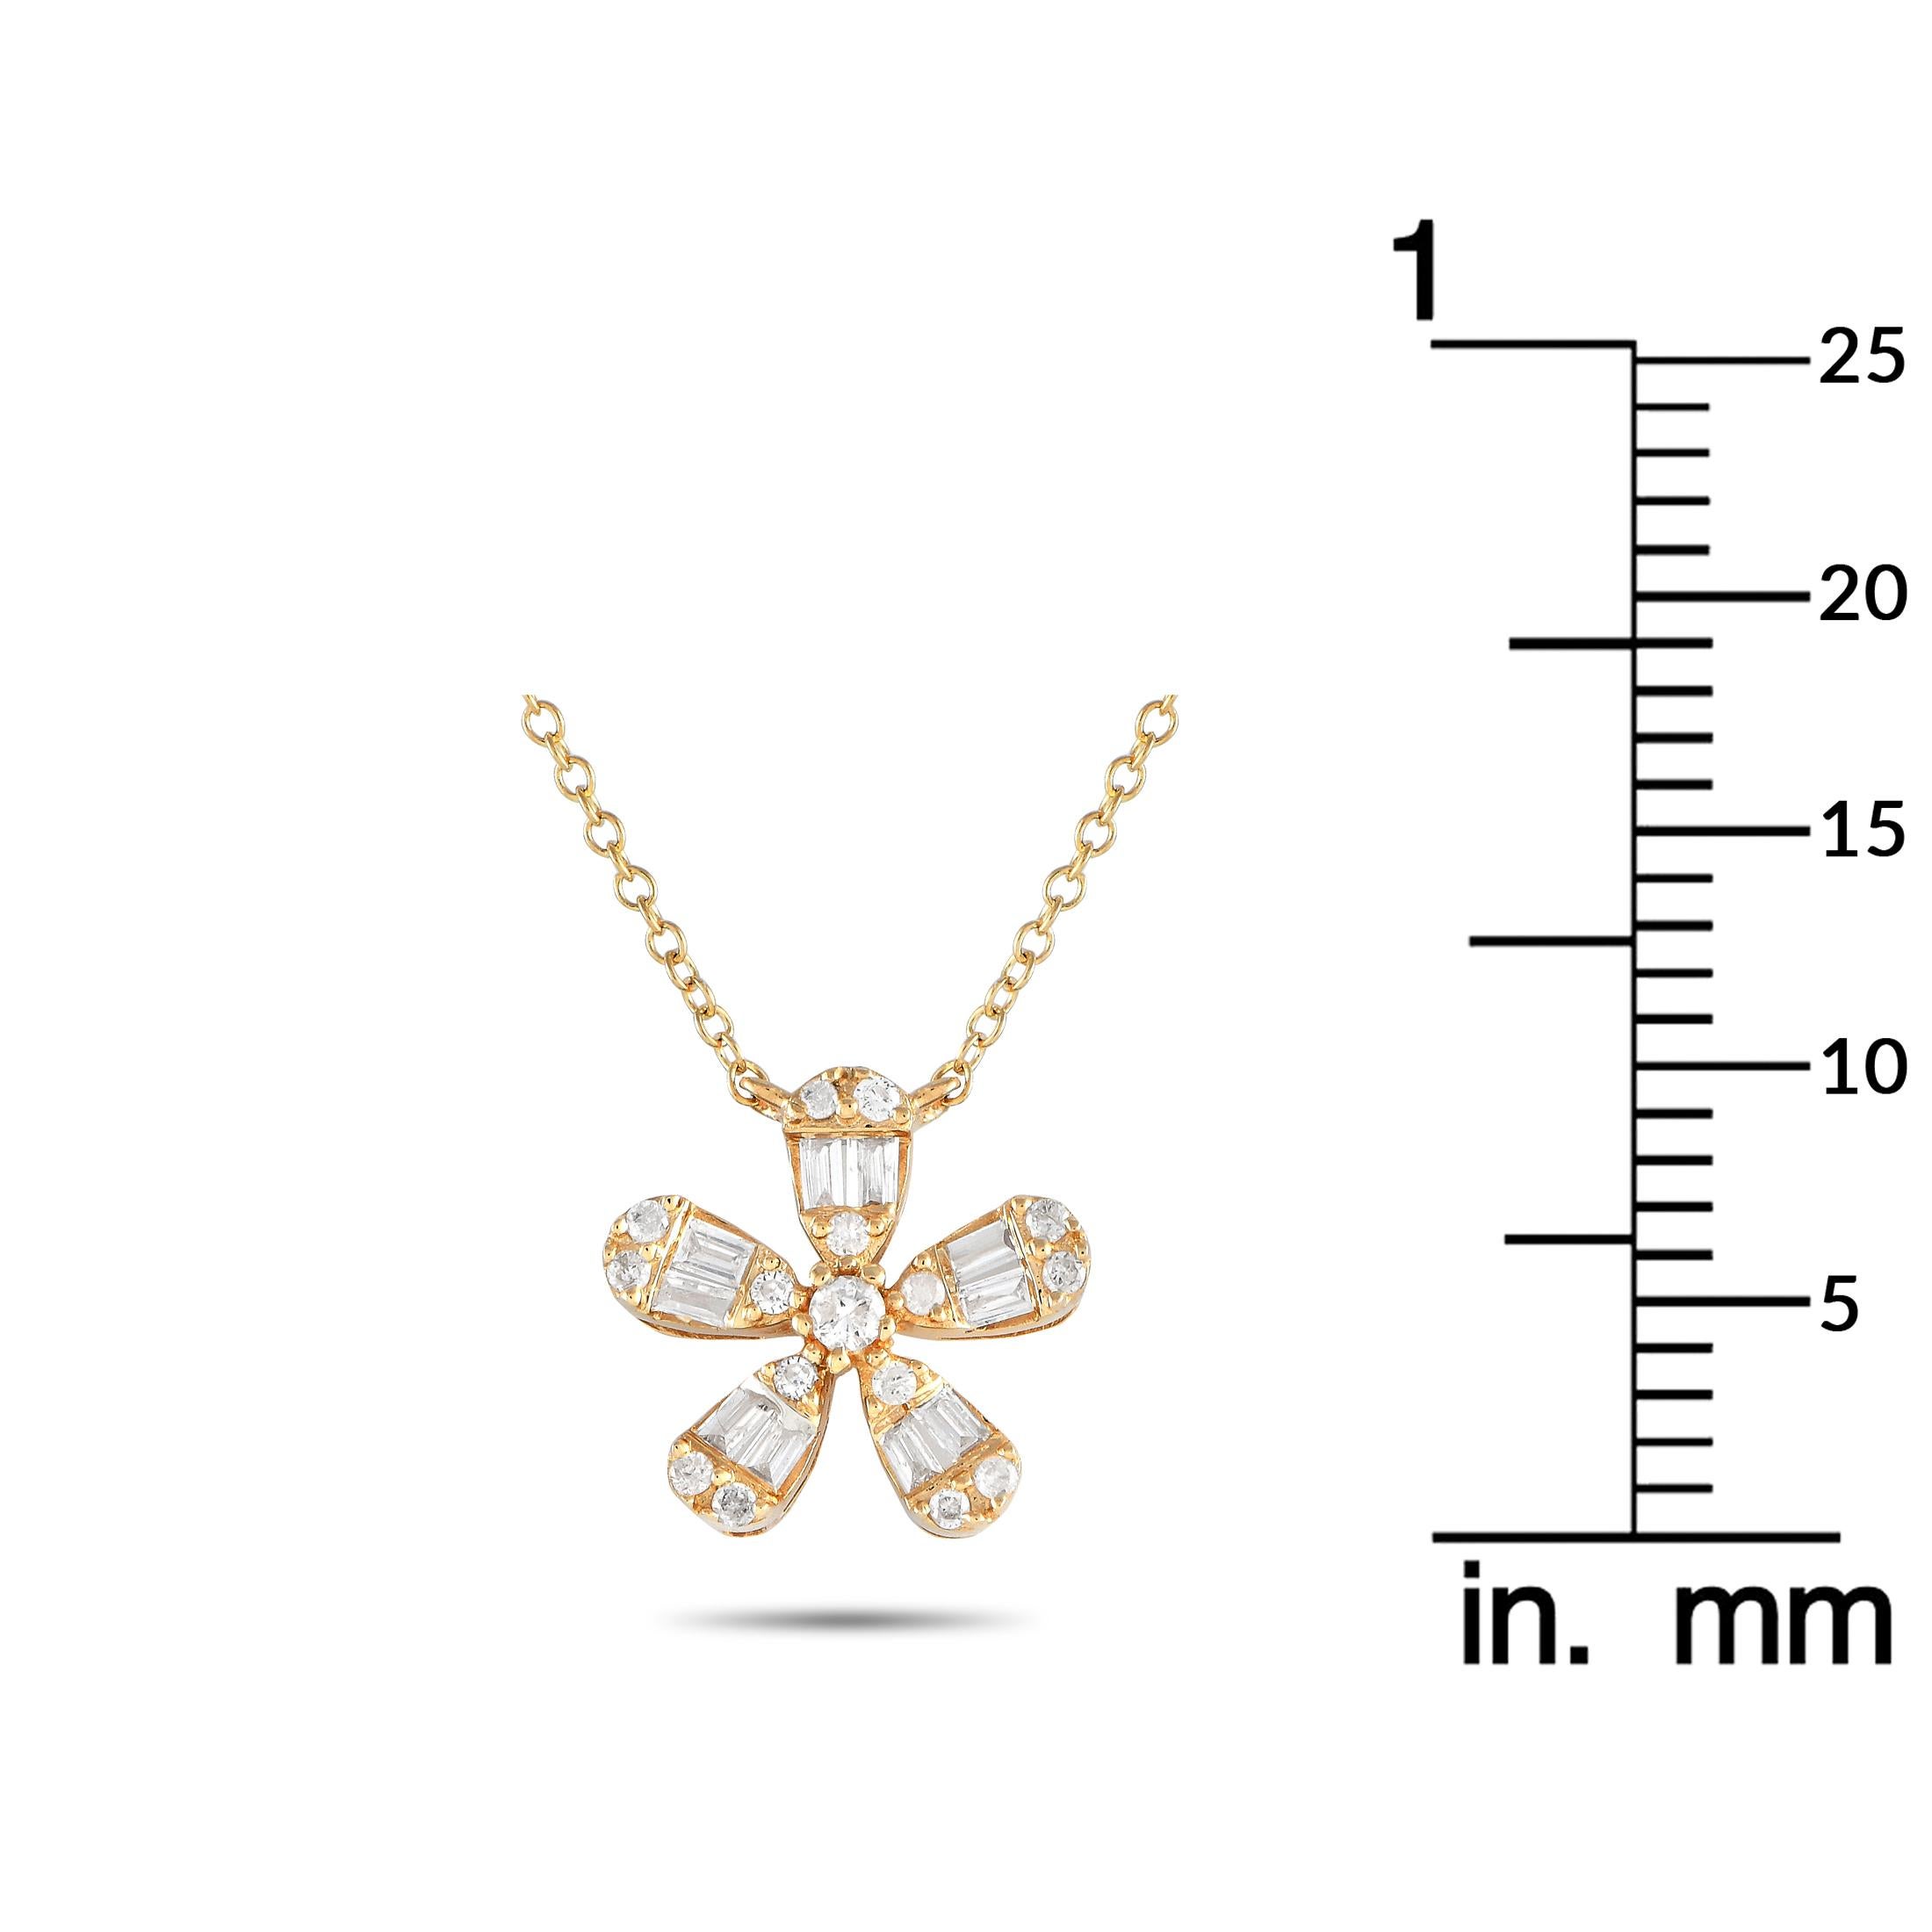 LB Exclusive 14K Yellow Gold 0.23ct Diamond Flower Necklace PN14995 In New Condition For Sale In Southampton, PA